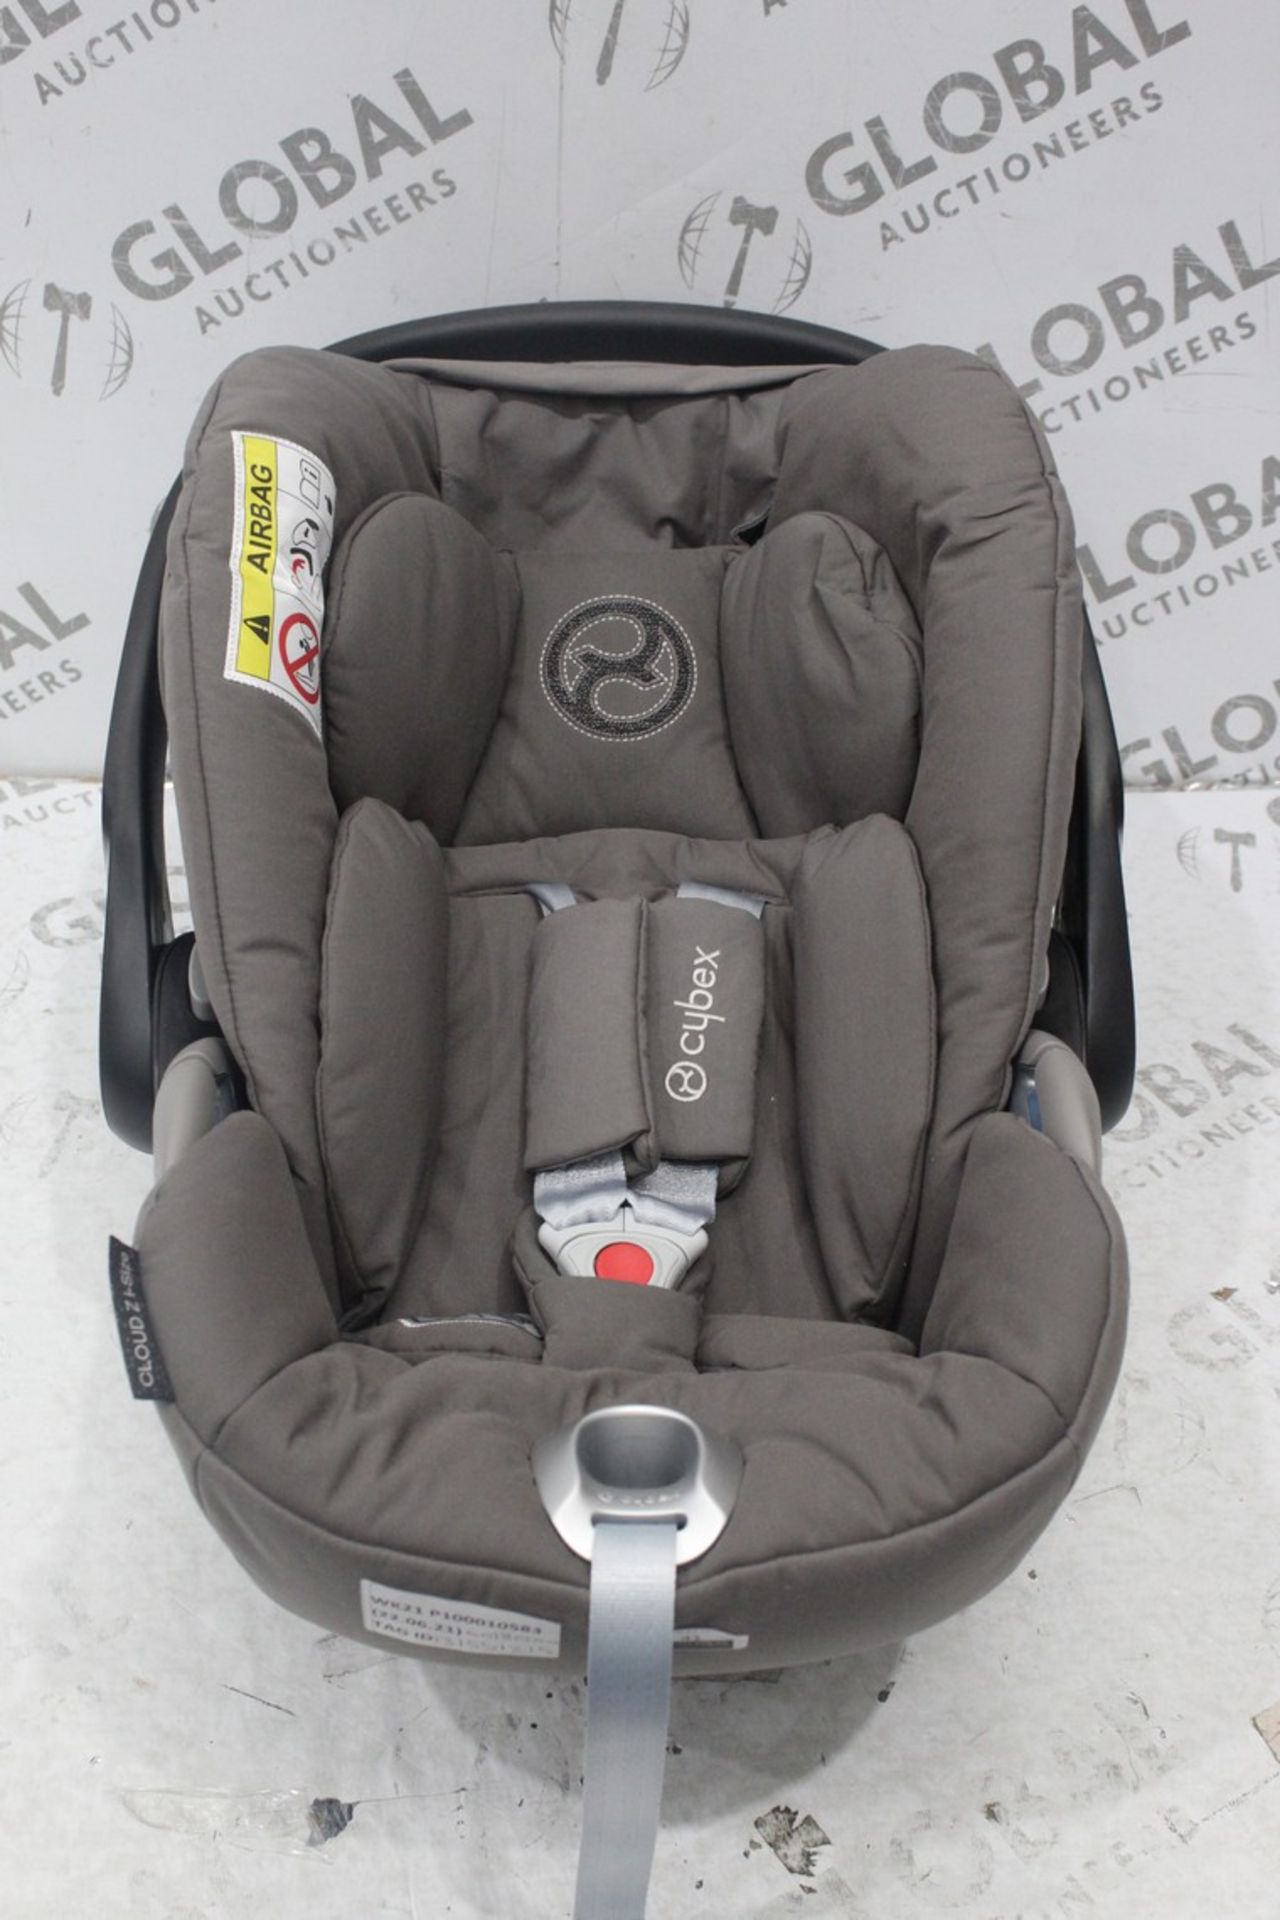 Cybex Cloud Z I-Size Platinum In Car Kids Safety Seat RRP £180 (3155125) (Pictures Are For